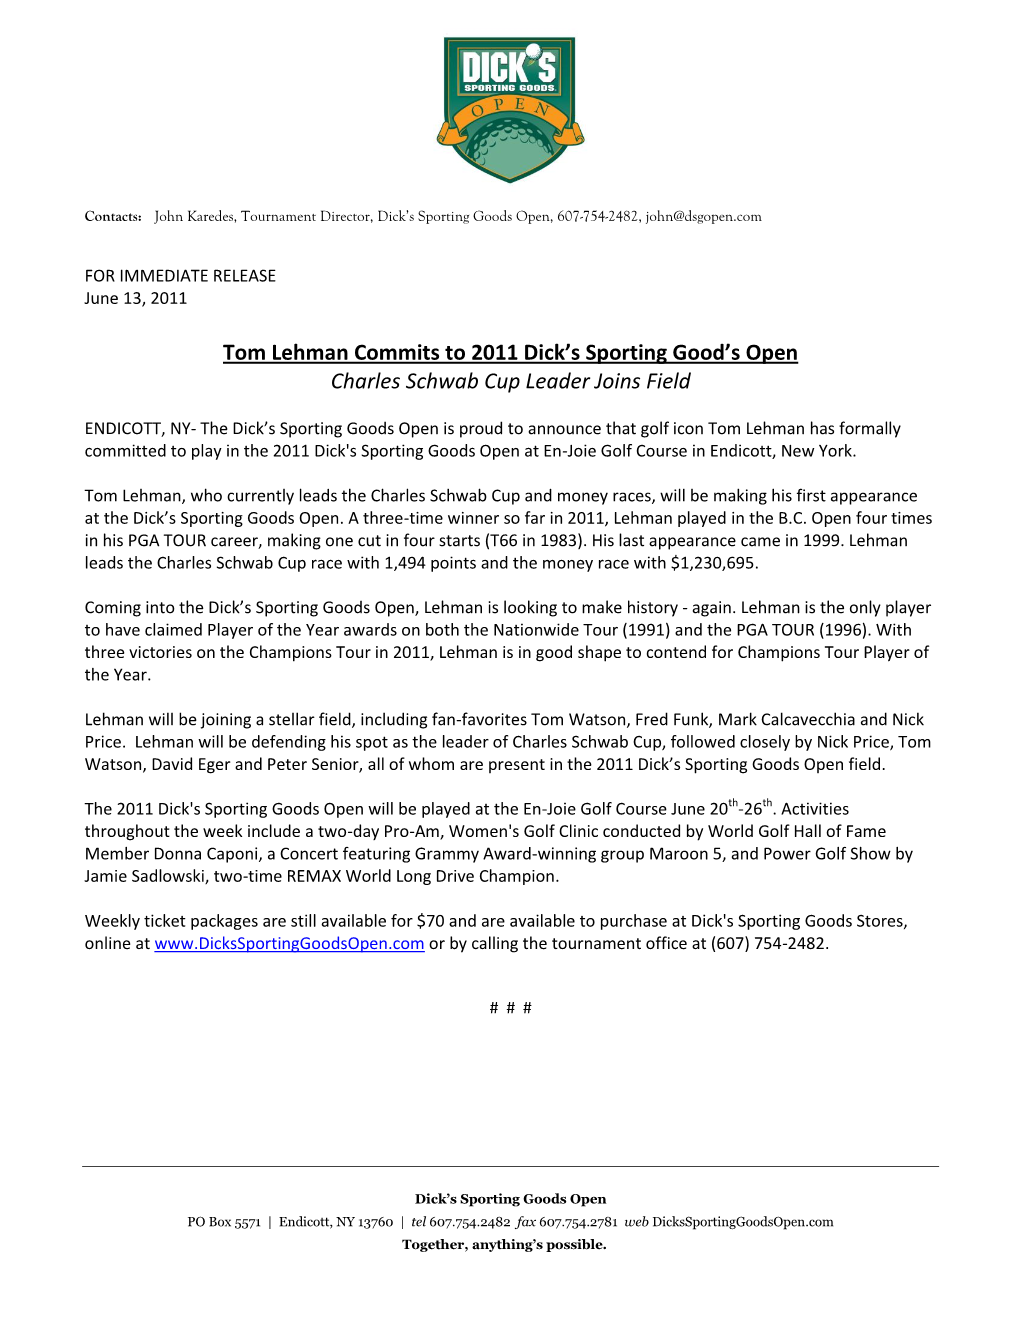 Tom Lehman Commits to 2011 Dick's Sporting Good's Open Charles